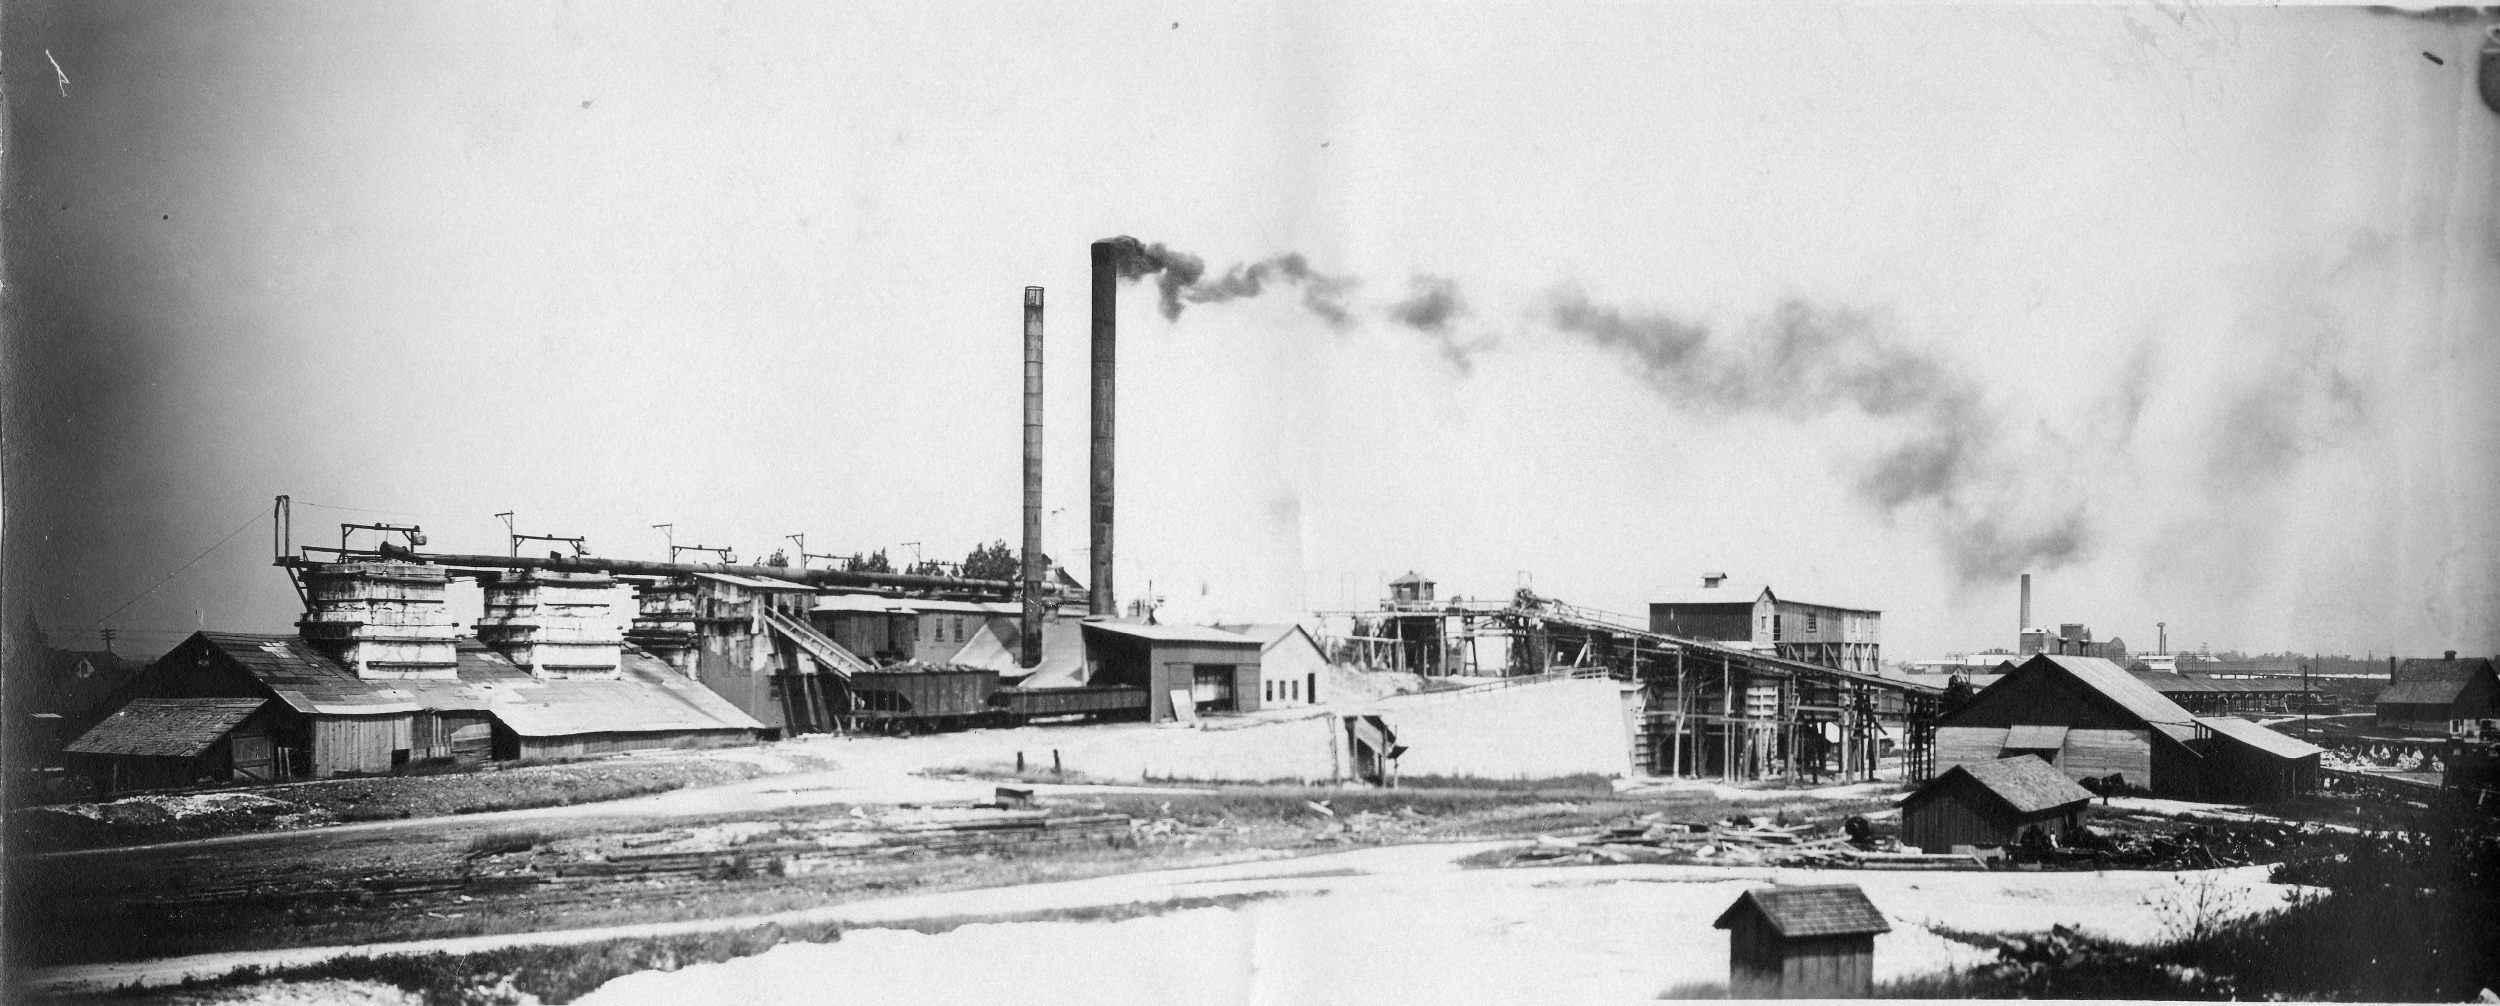 White Marble Lime Co. hydrating plant and kilns located on Maple Street, west of the current quarry pool in Central Park. Slab wood, which was used as fuel, was piled where the football stadium, track and field are presently.